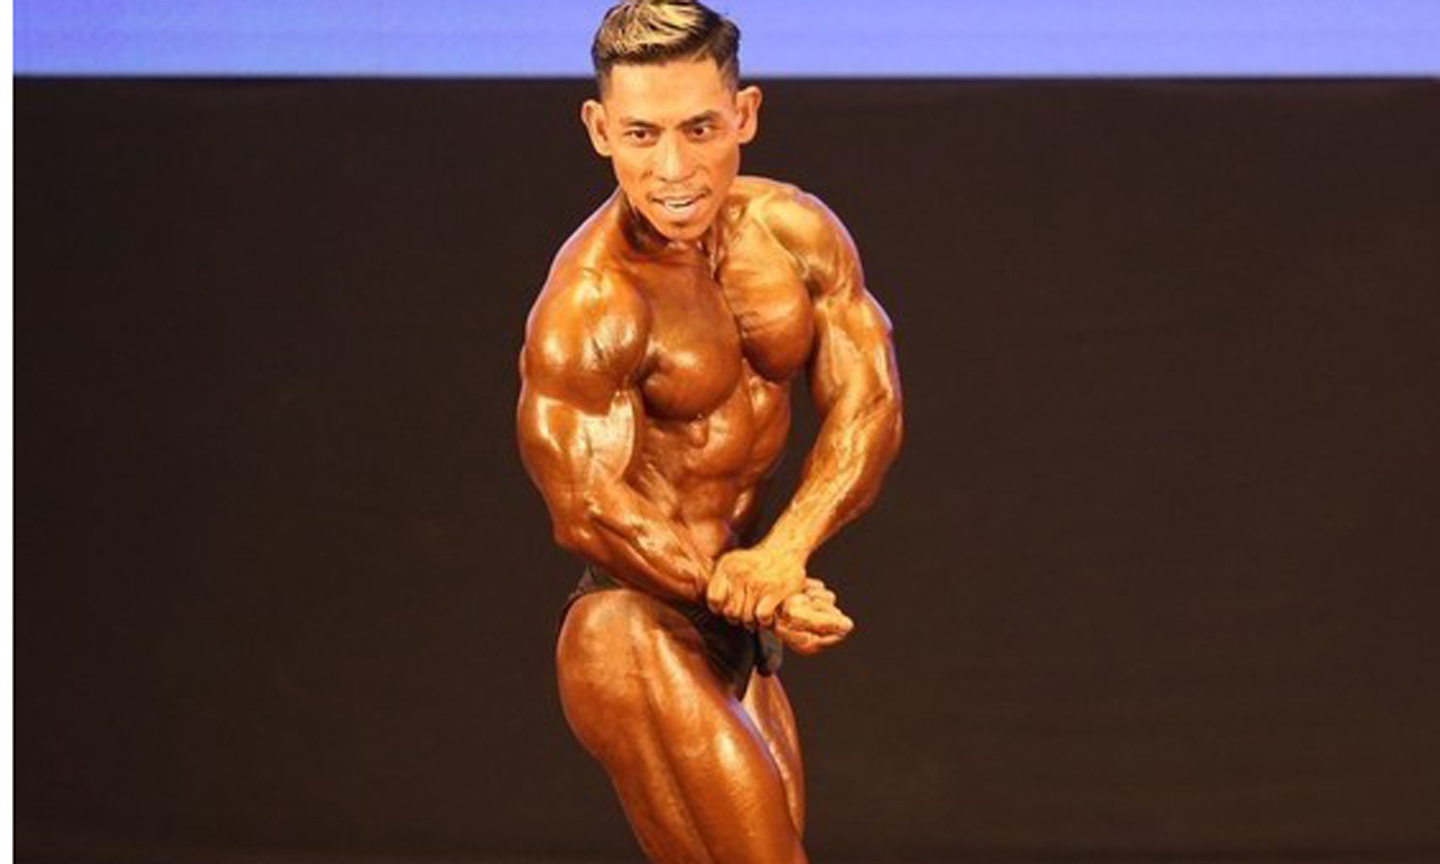 Pham Van Mach wins gold at the 14th WBPF World Bodybuilding and Physique Sports Championships & Congress on November 9. (Photo courtesy of the organisers).